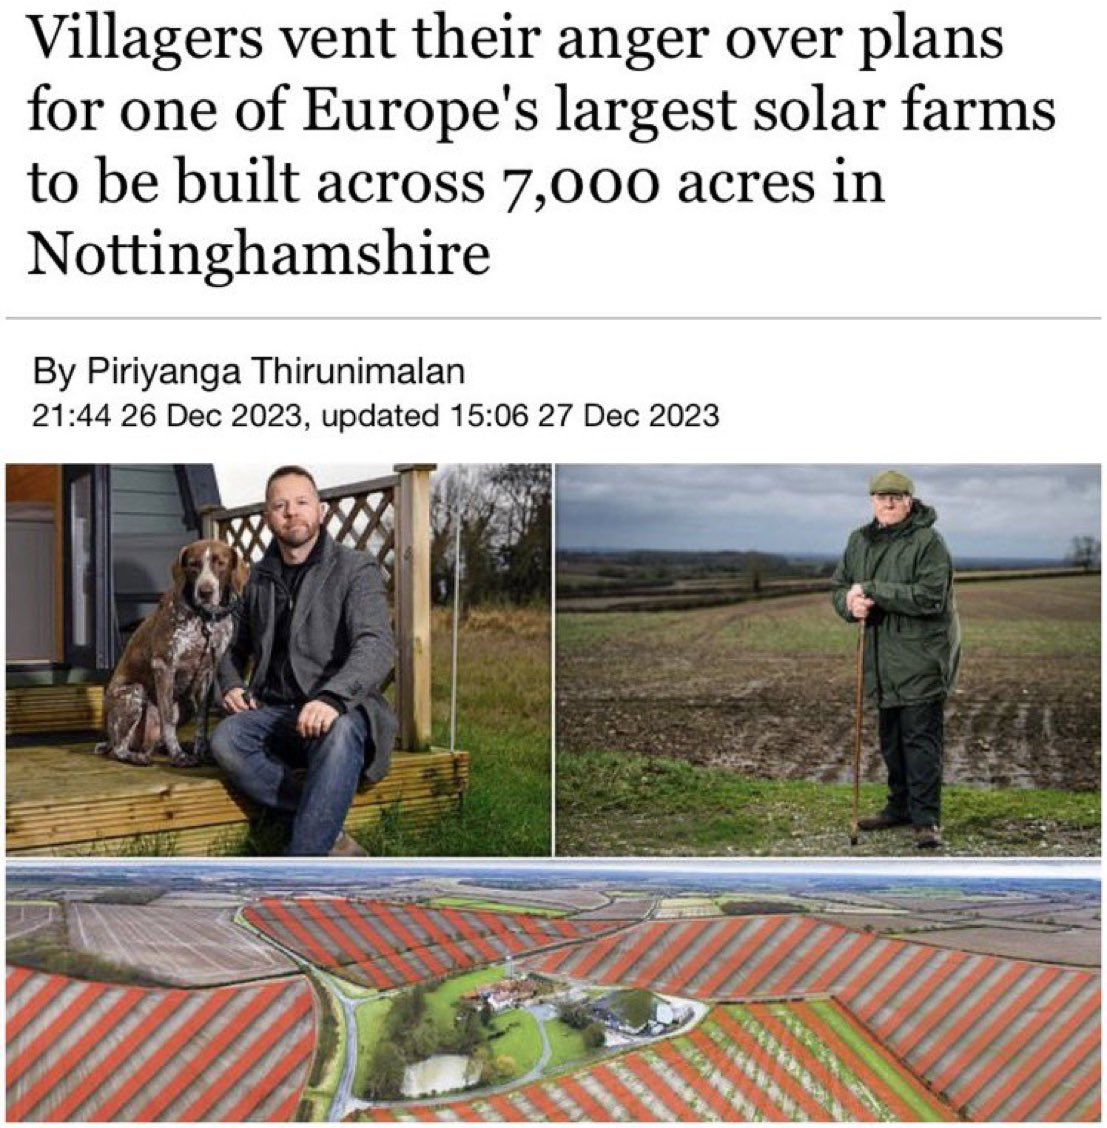 UK 🇬🇧 “Residents and farmers in Newark, Nottinghamshire are furious at the proposal for a 7,000-acre Great North Road solar park on productive agricultural land.”